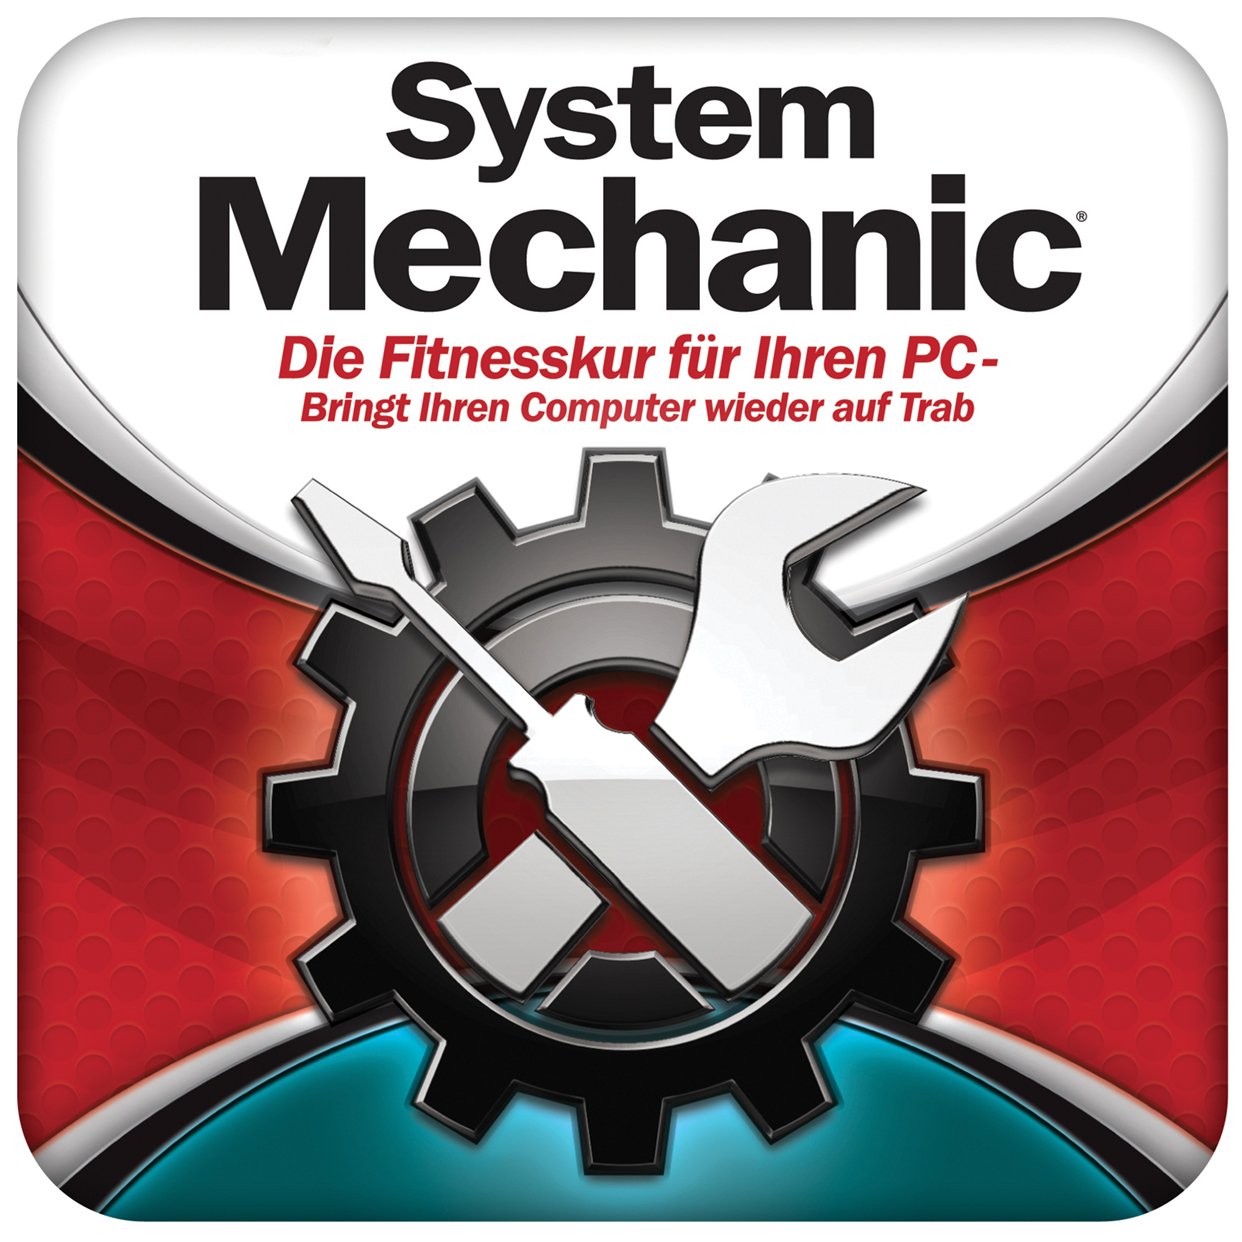 iolo system mechanic pro crack download